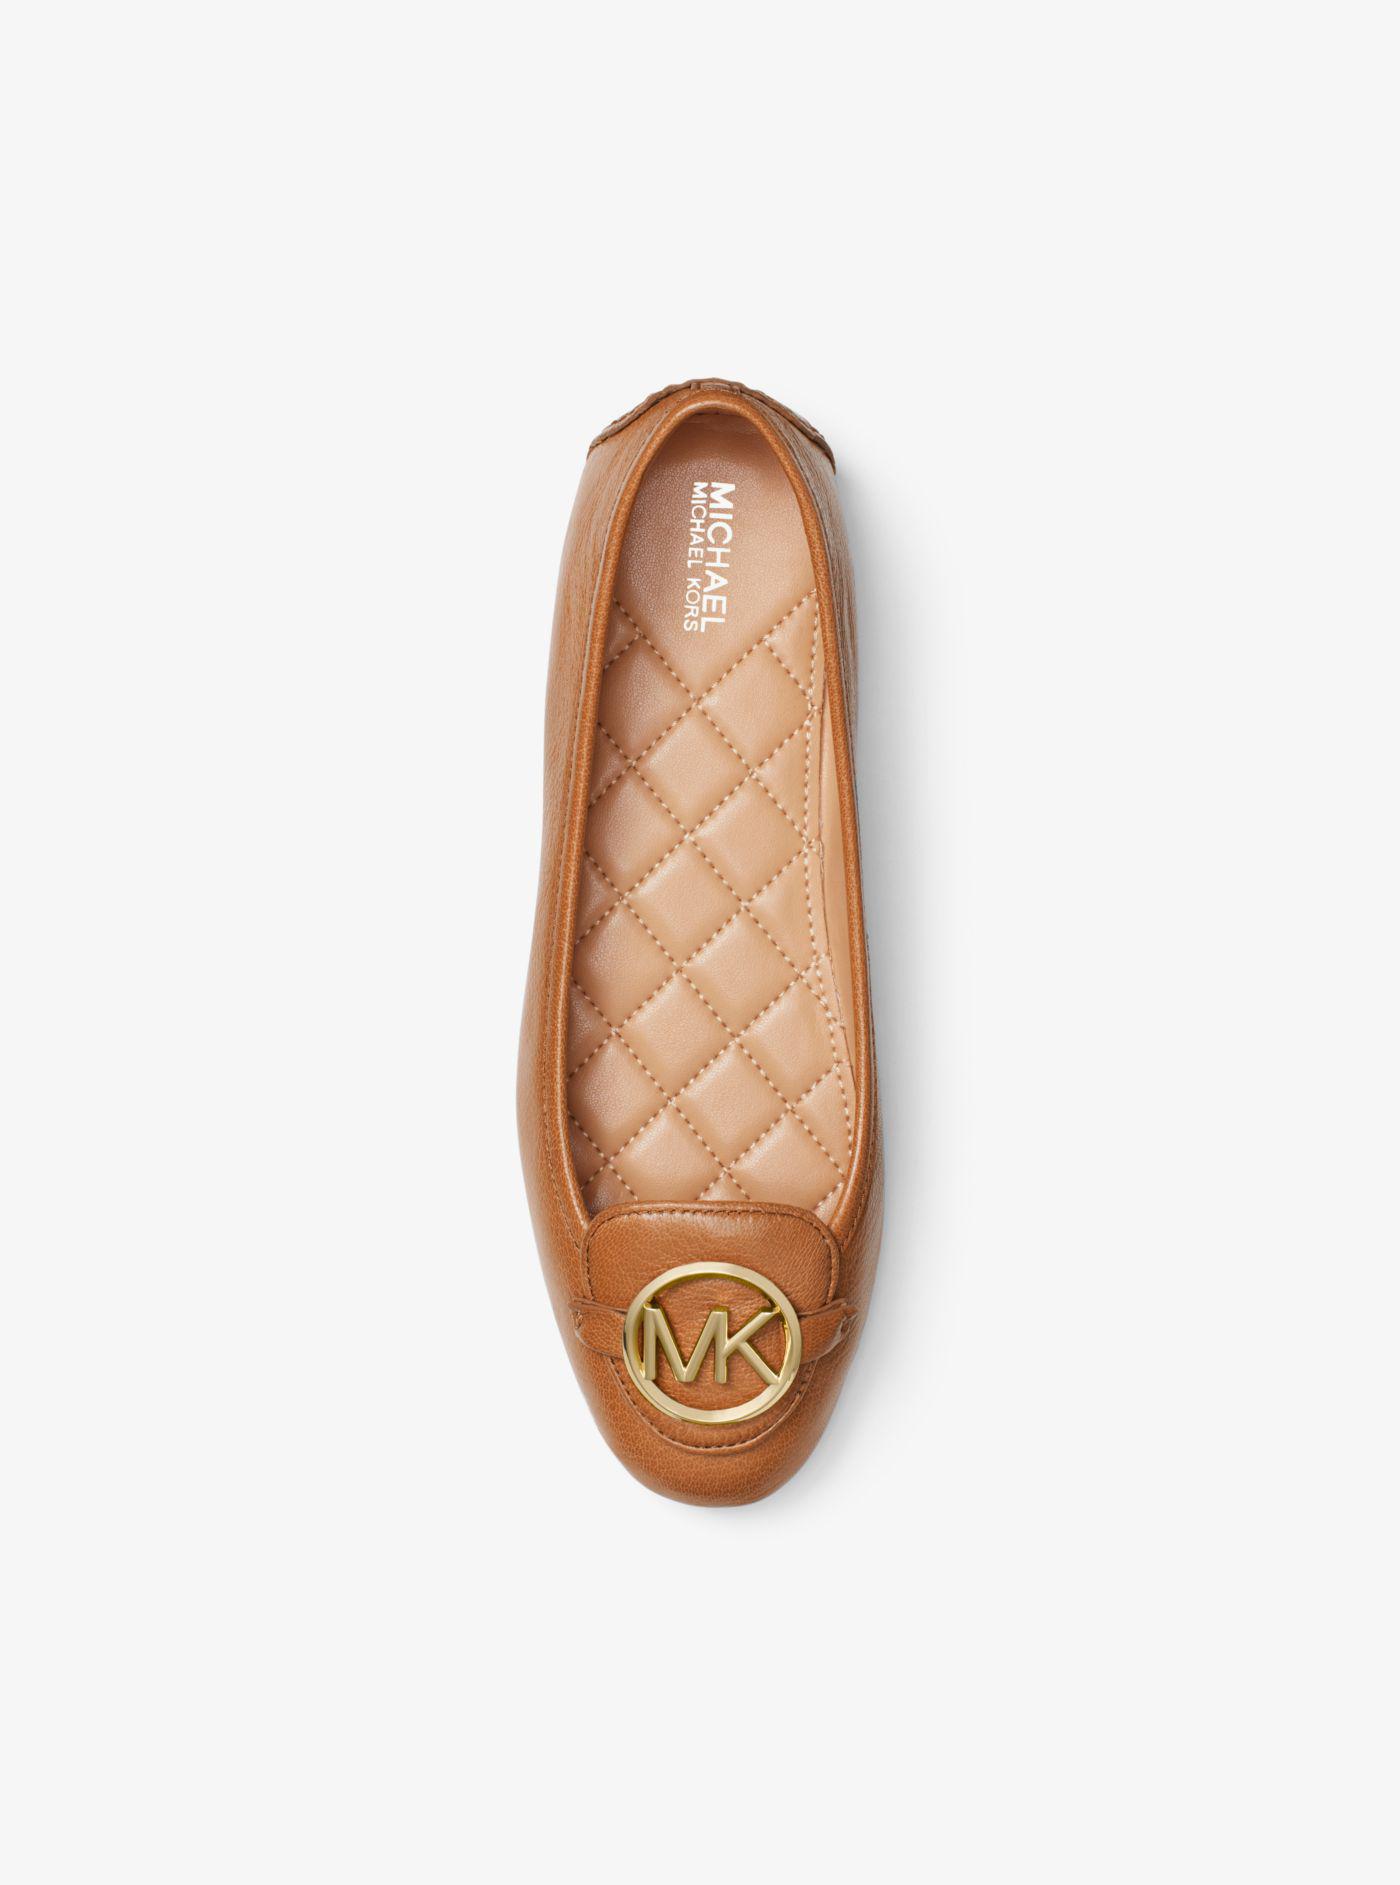 michael kors lillie leather moccasin